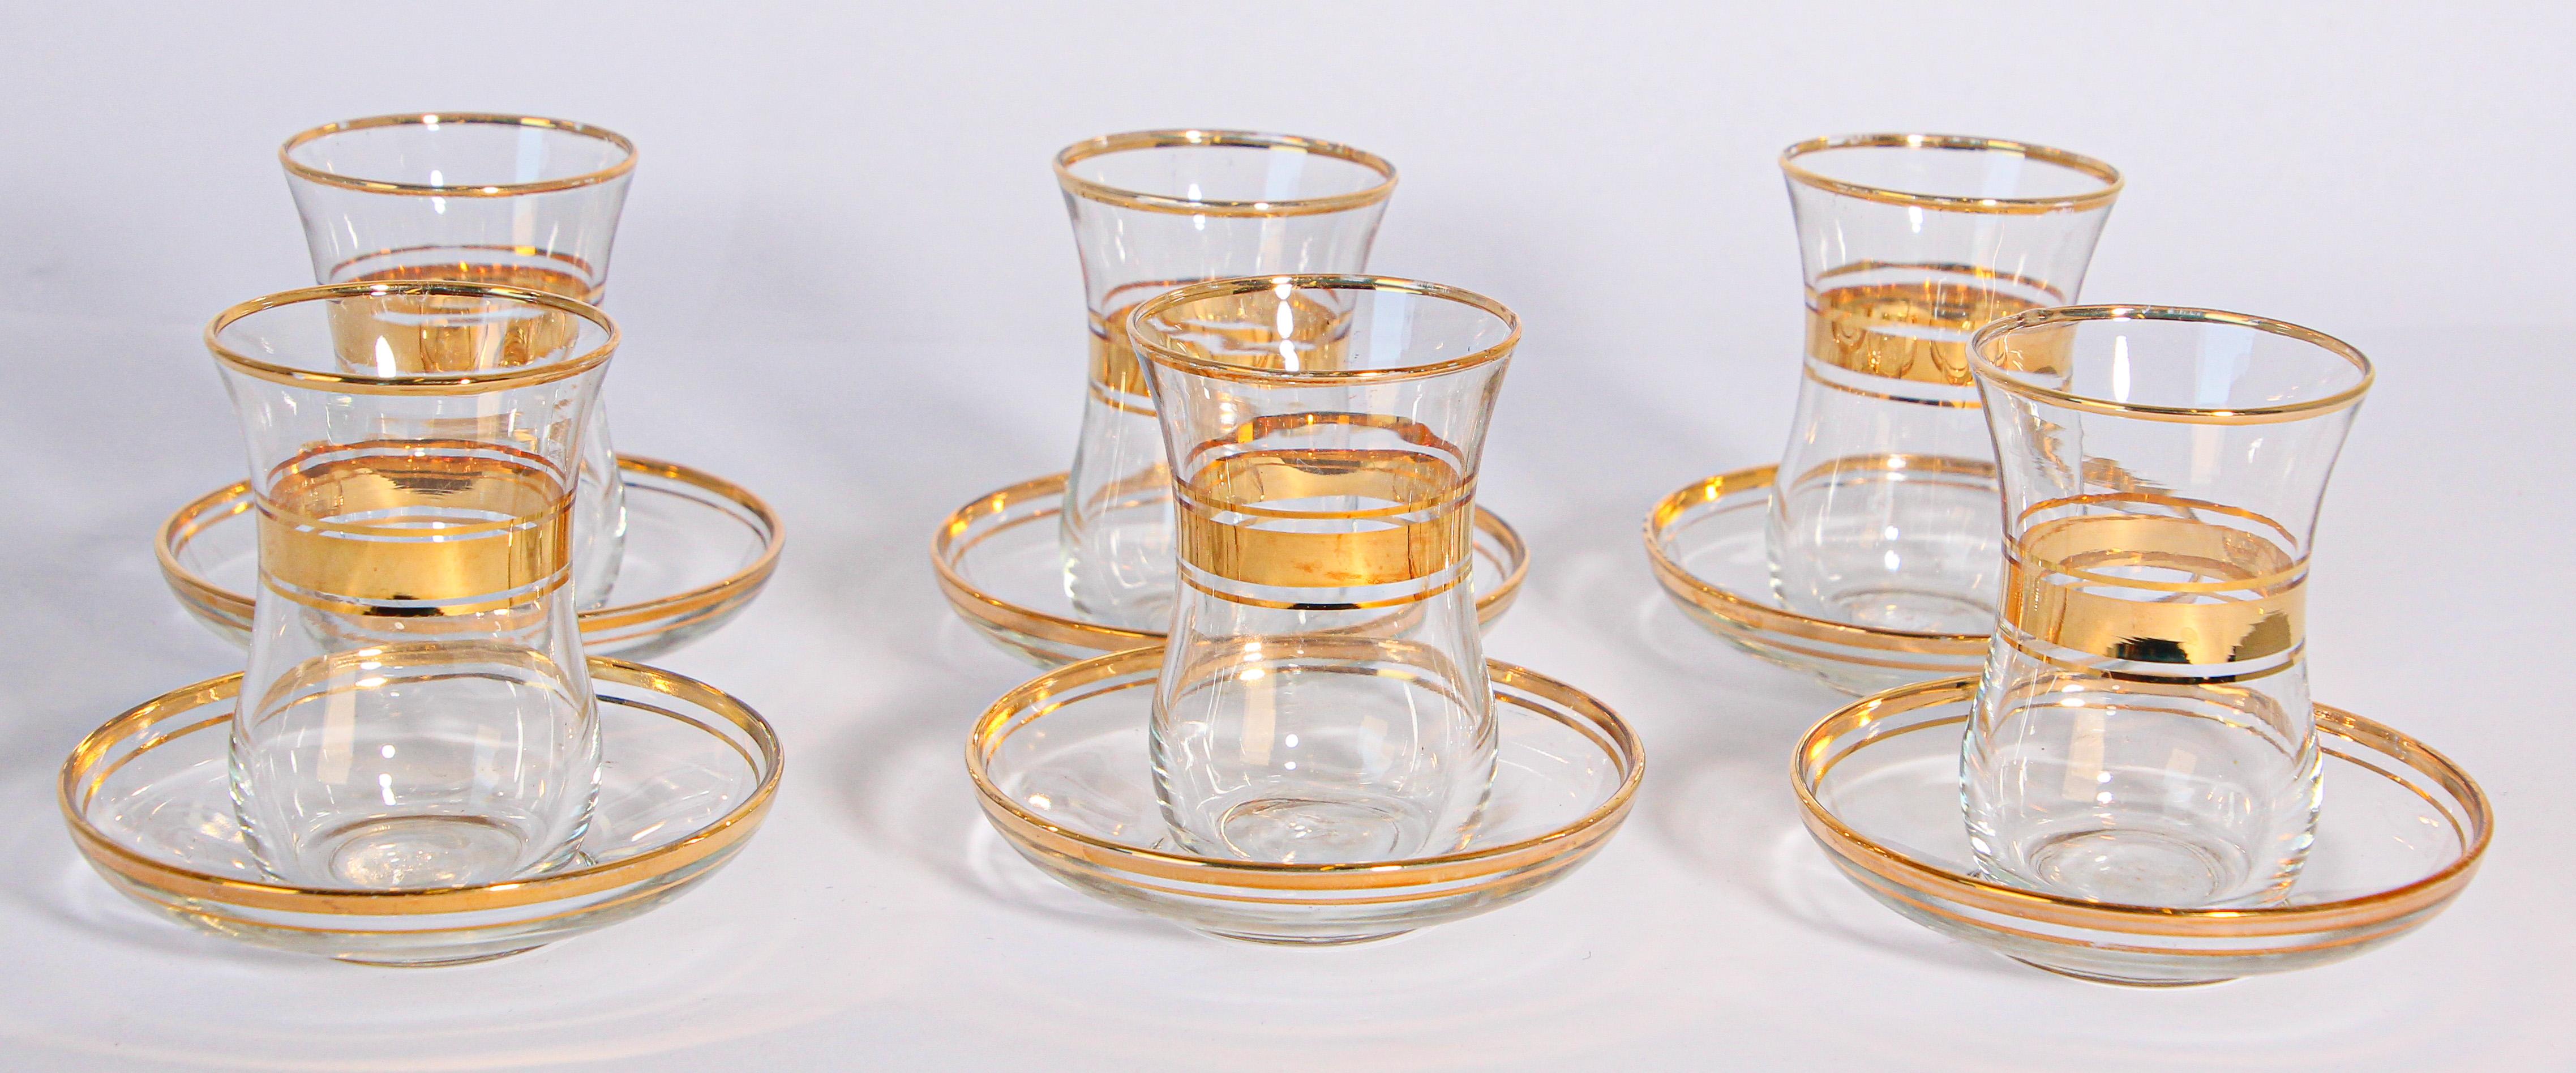 Turkish Tea Glasses with Gold Overlay Set of Six For Sale 5